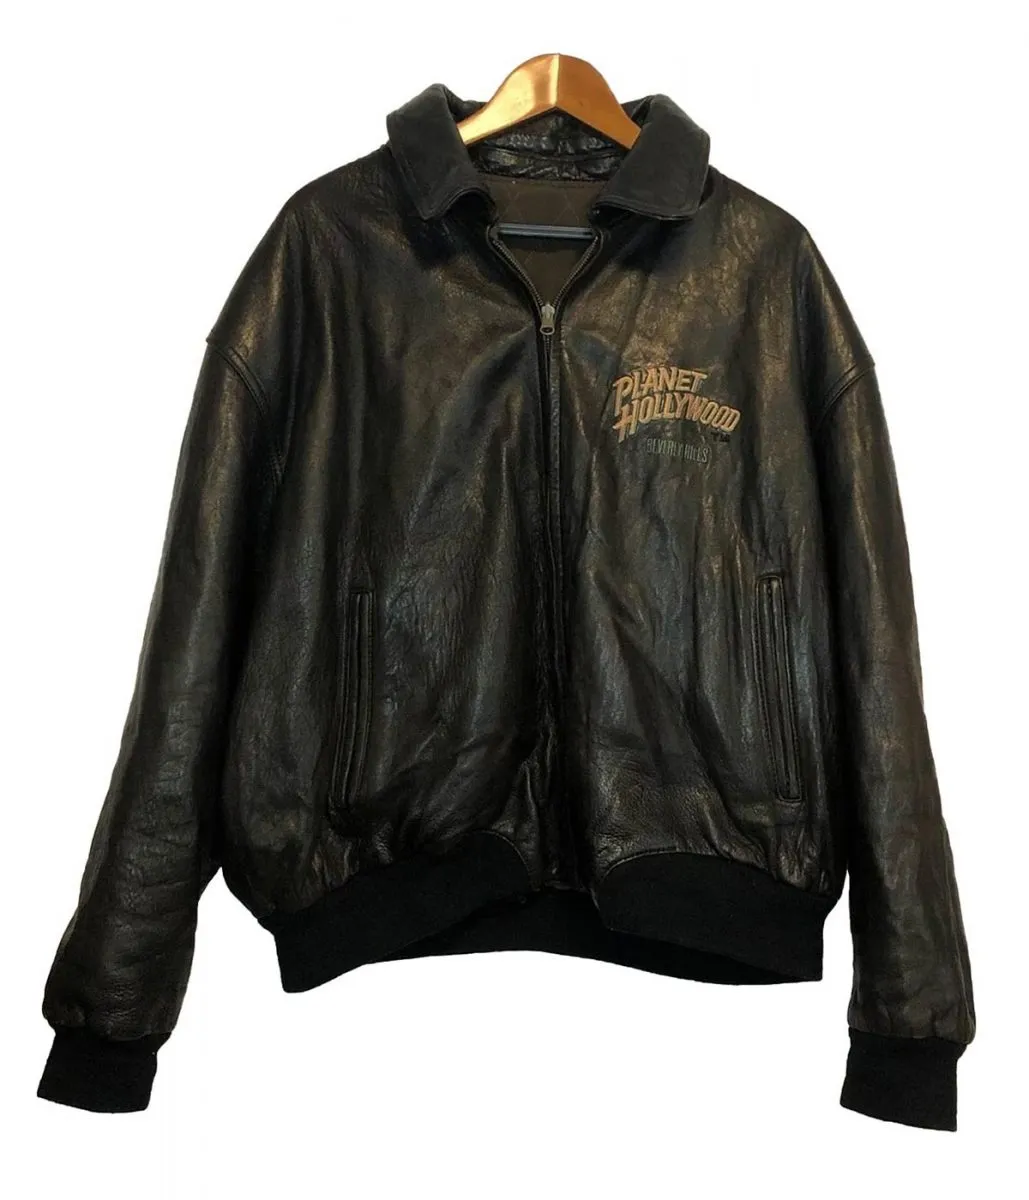 Planet Hollywood Beverly Hills Bomber Leather Jacket